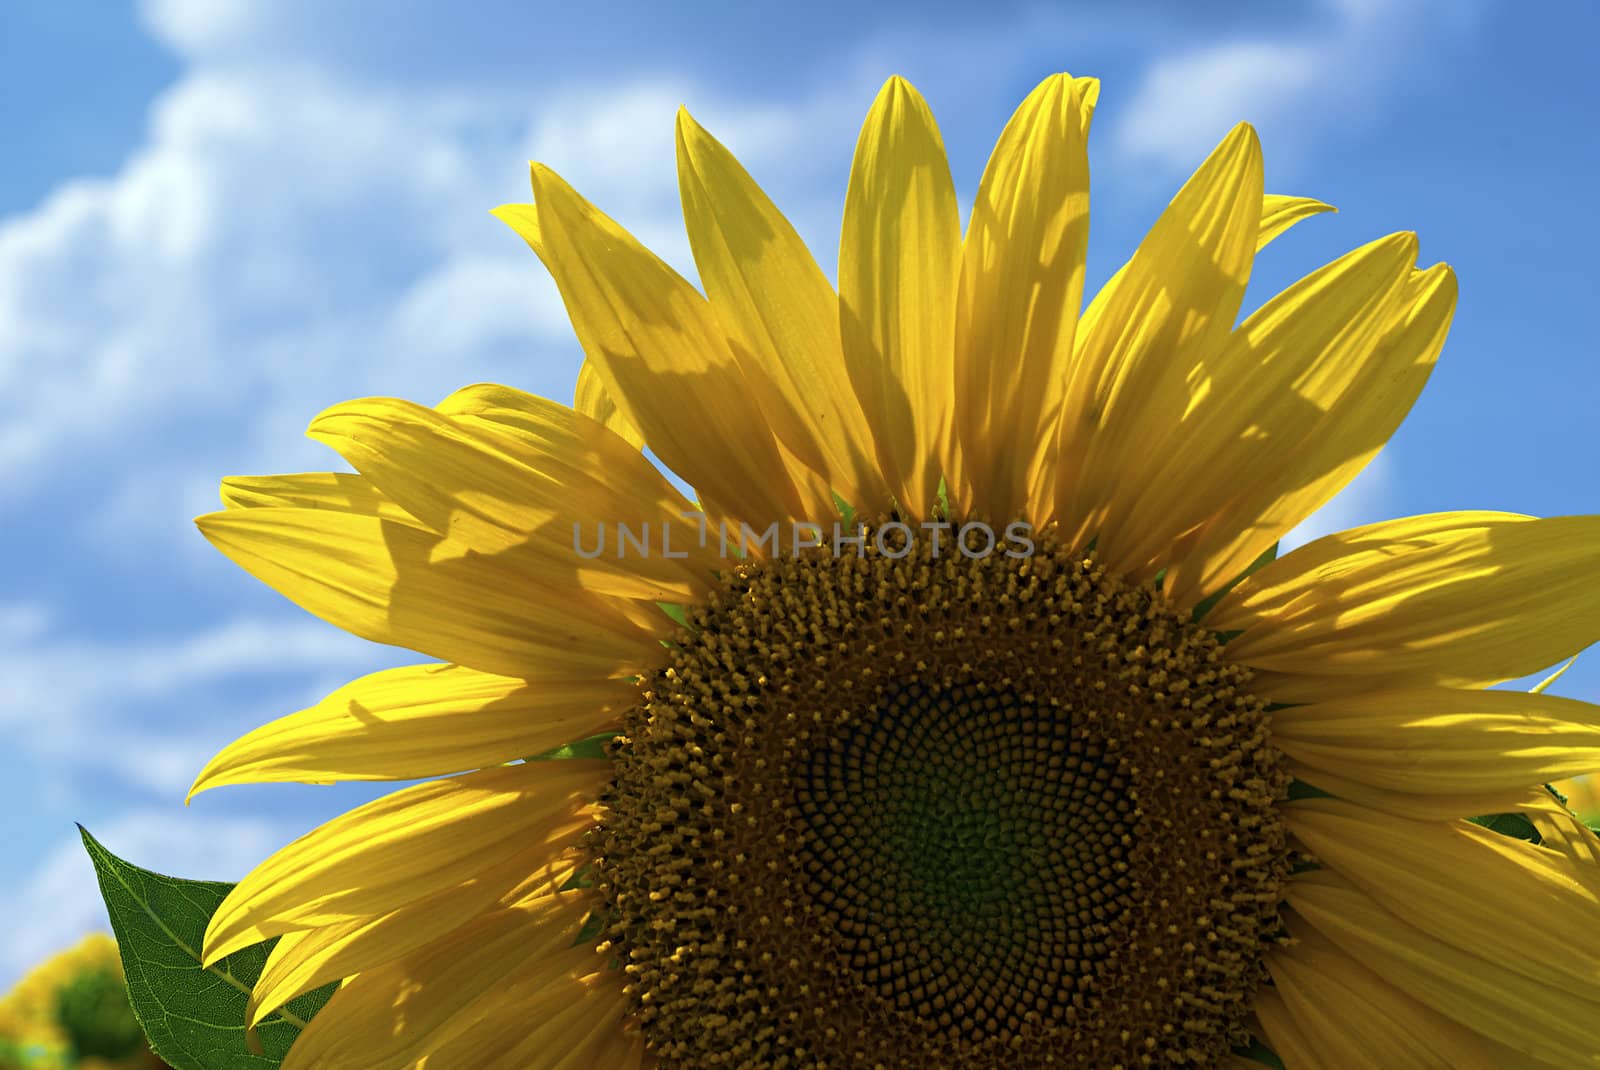 Sunflower closeup on a background of the blue sky with clouds